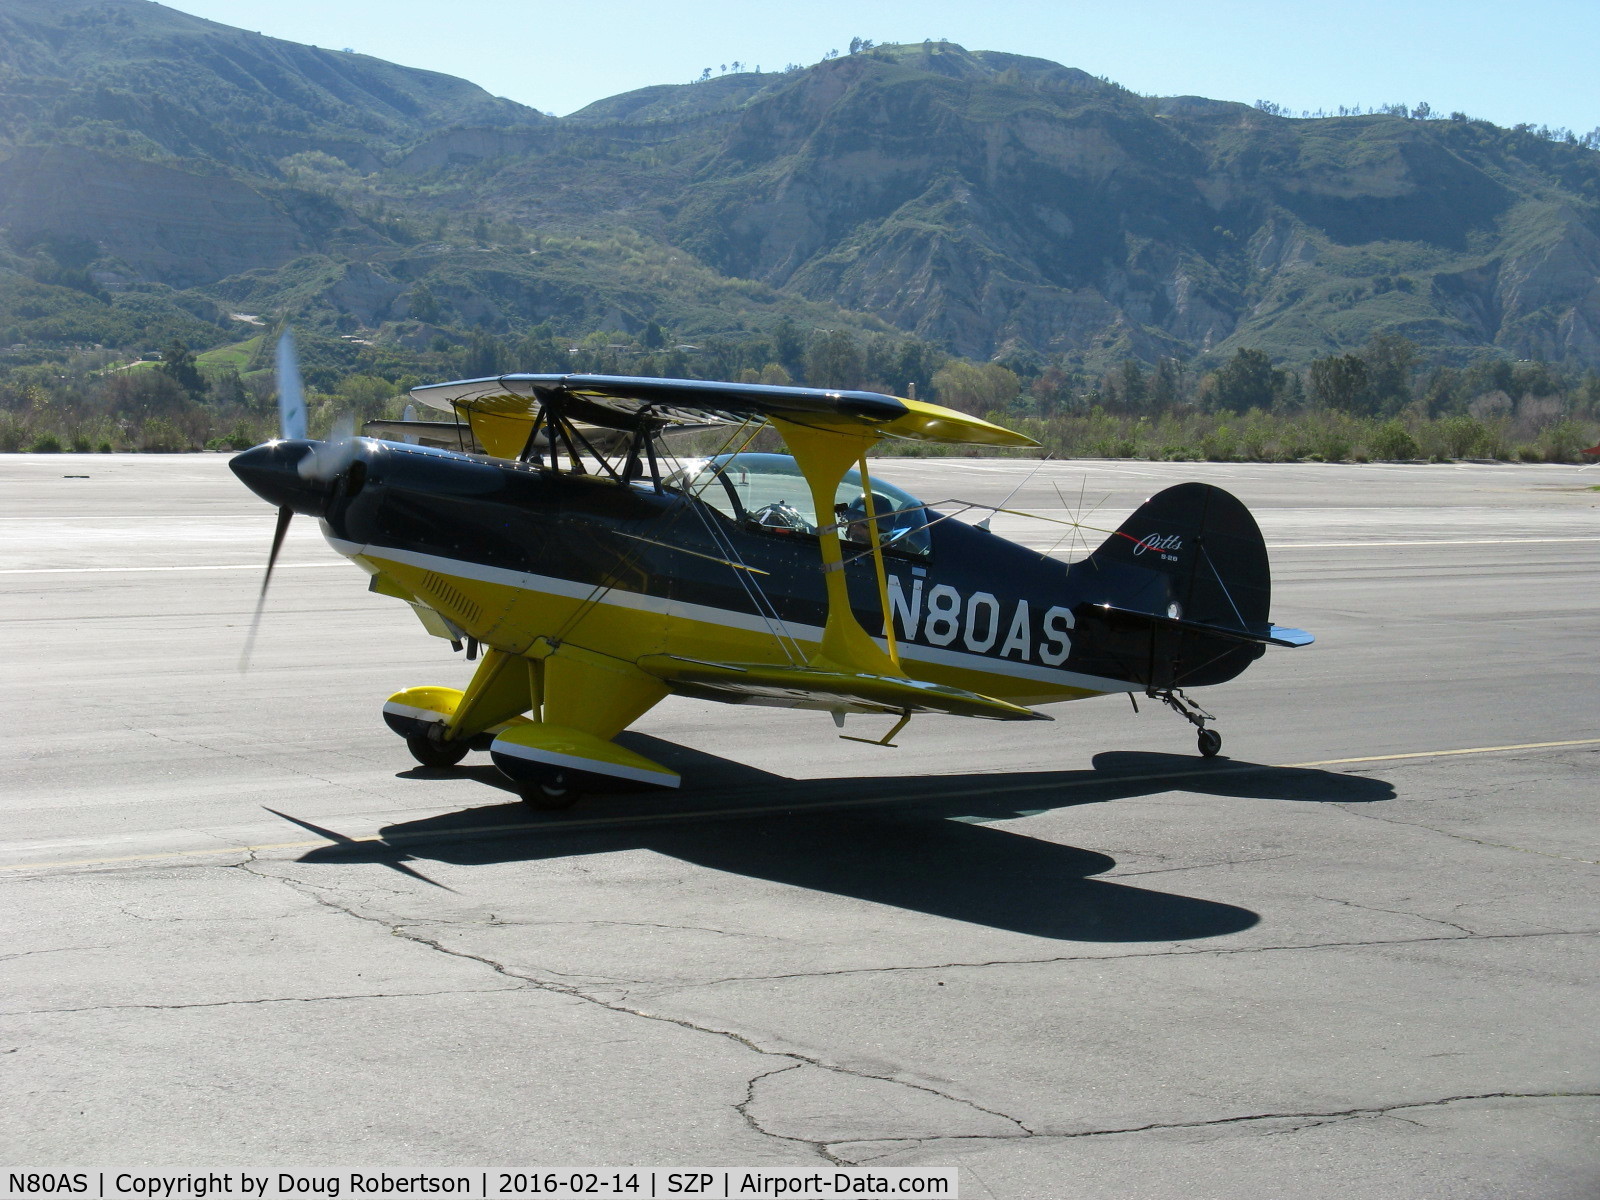 N80AS, 1992 Pitts S-2B Special C/N 5244, 1992 Pitts S-2B SPECIAL, Lycoming AEIO-540-D4A5 260 Hp, S-turns taxi to Rwy 22